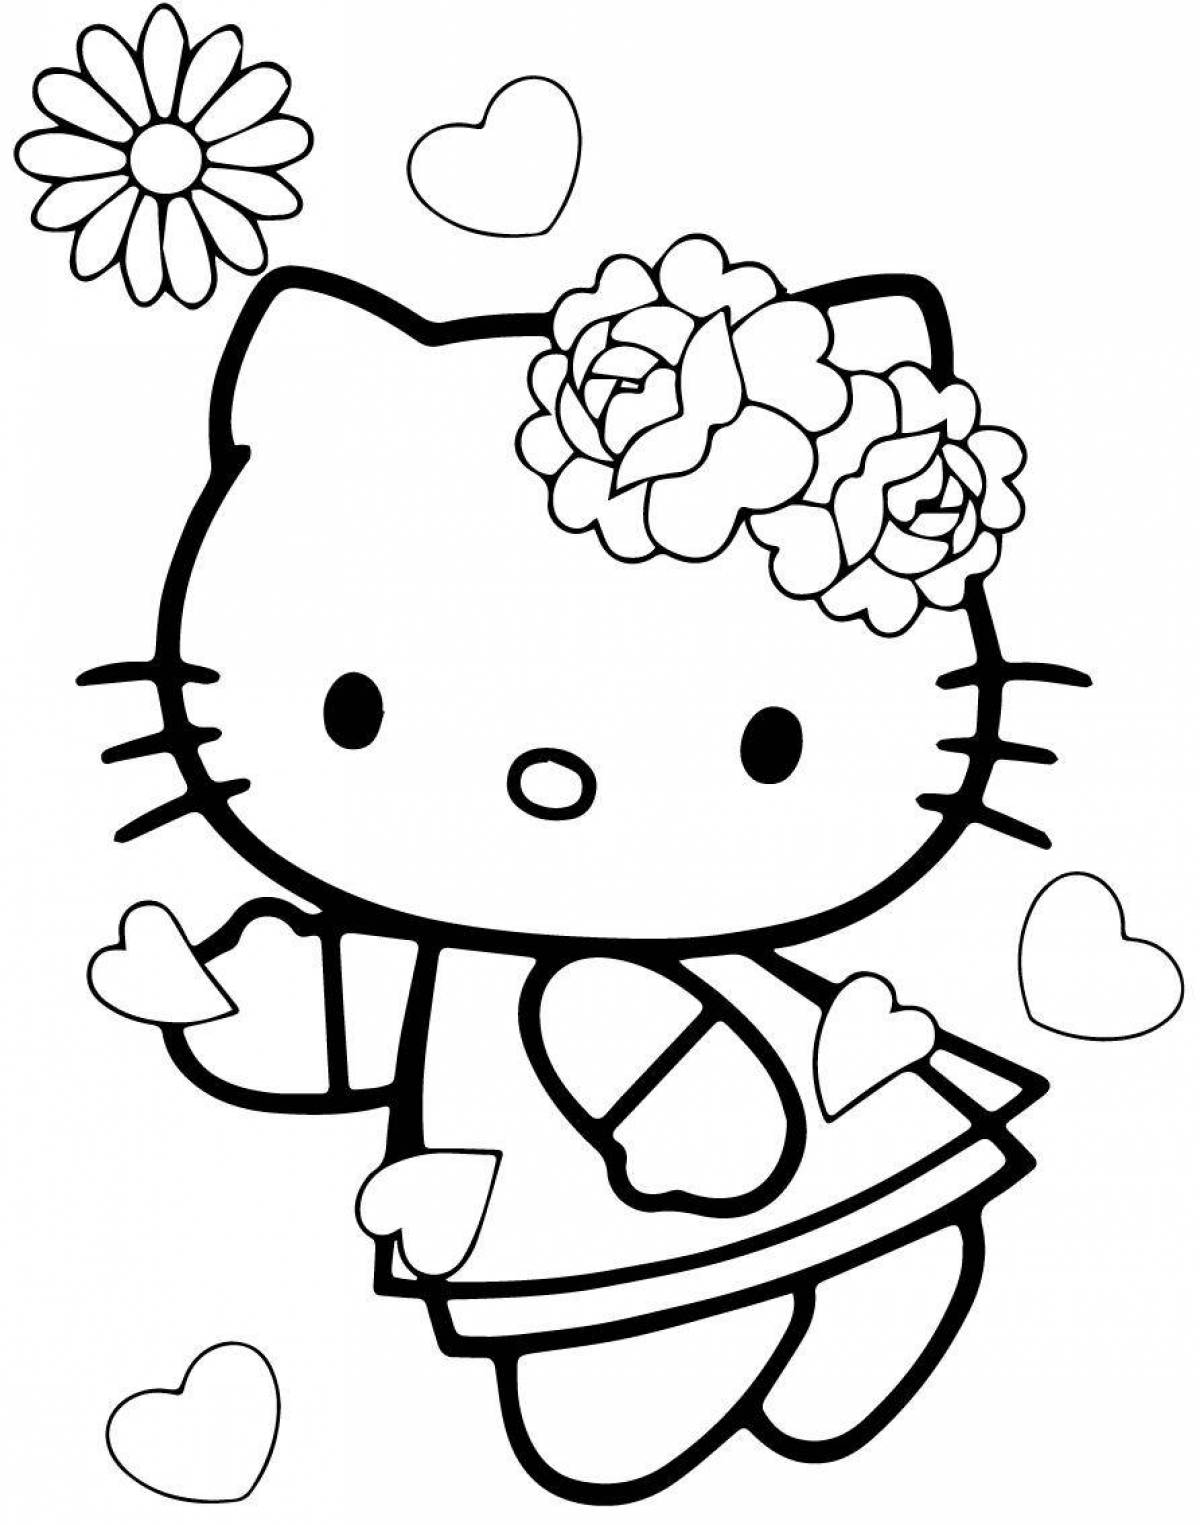 Amazing coloring hello kitty with a heart